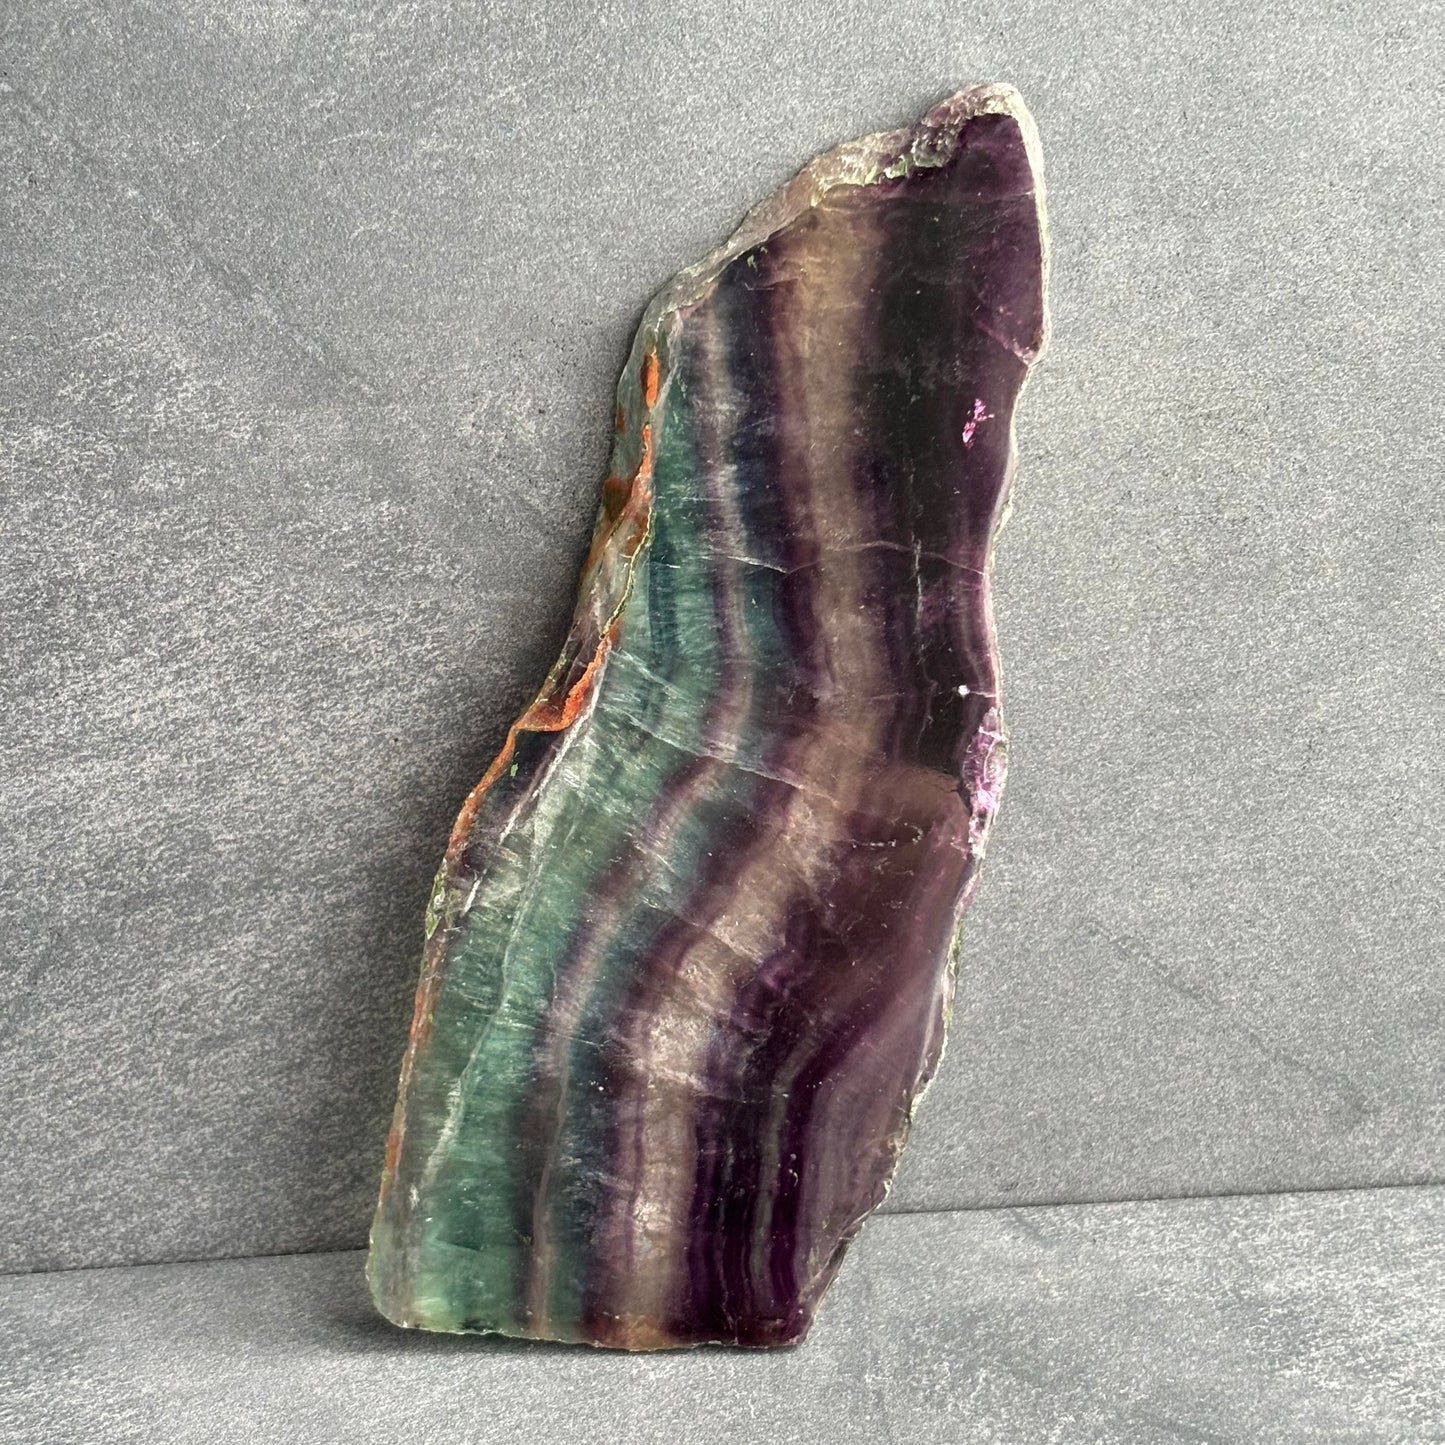 This Rainbow Fluorite Slab is utterly stunning and an amazing statement piece, adding both beauty and positive energy to any space ✨  Weighing in at just over a massive 300g and 17cm in length, this huge rainbow Fluorite Slab is truly a one-off rare find